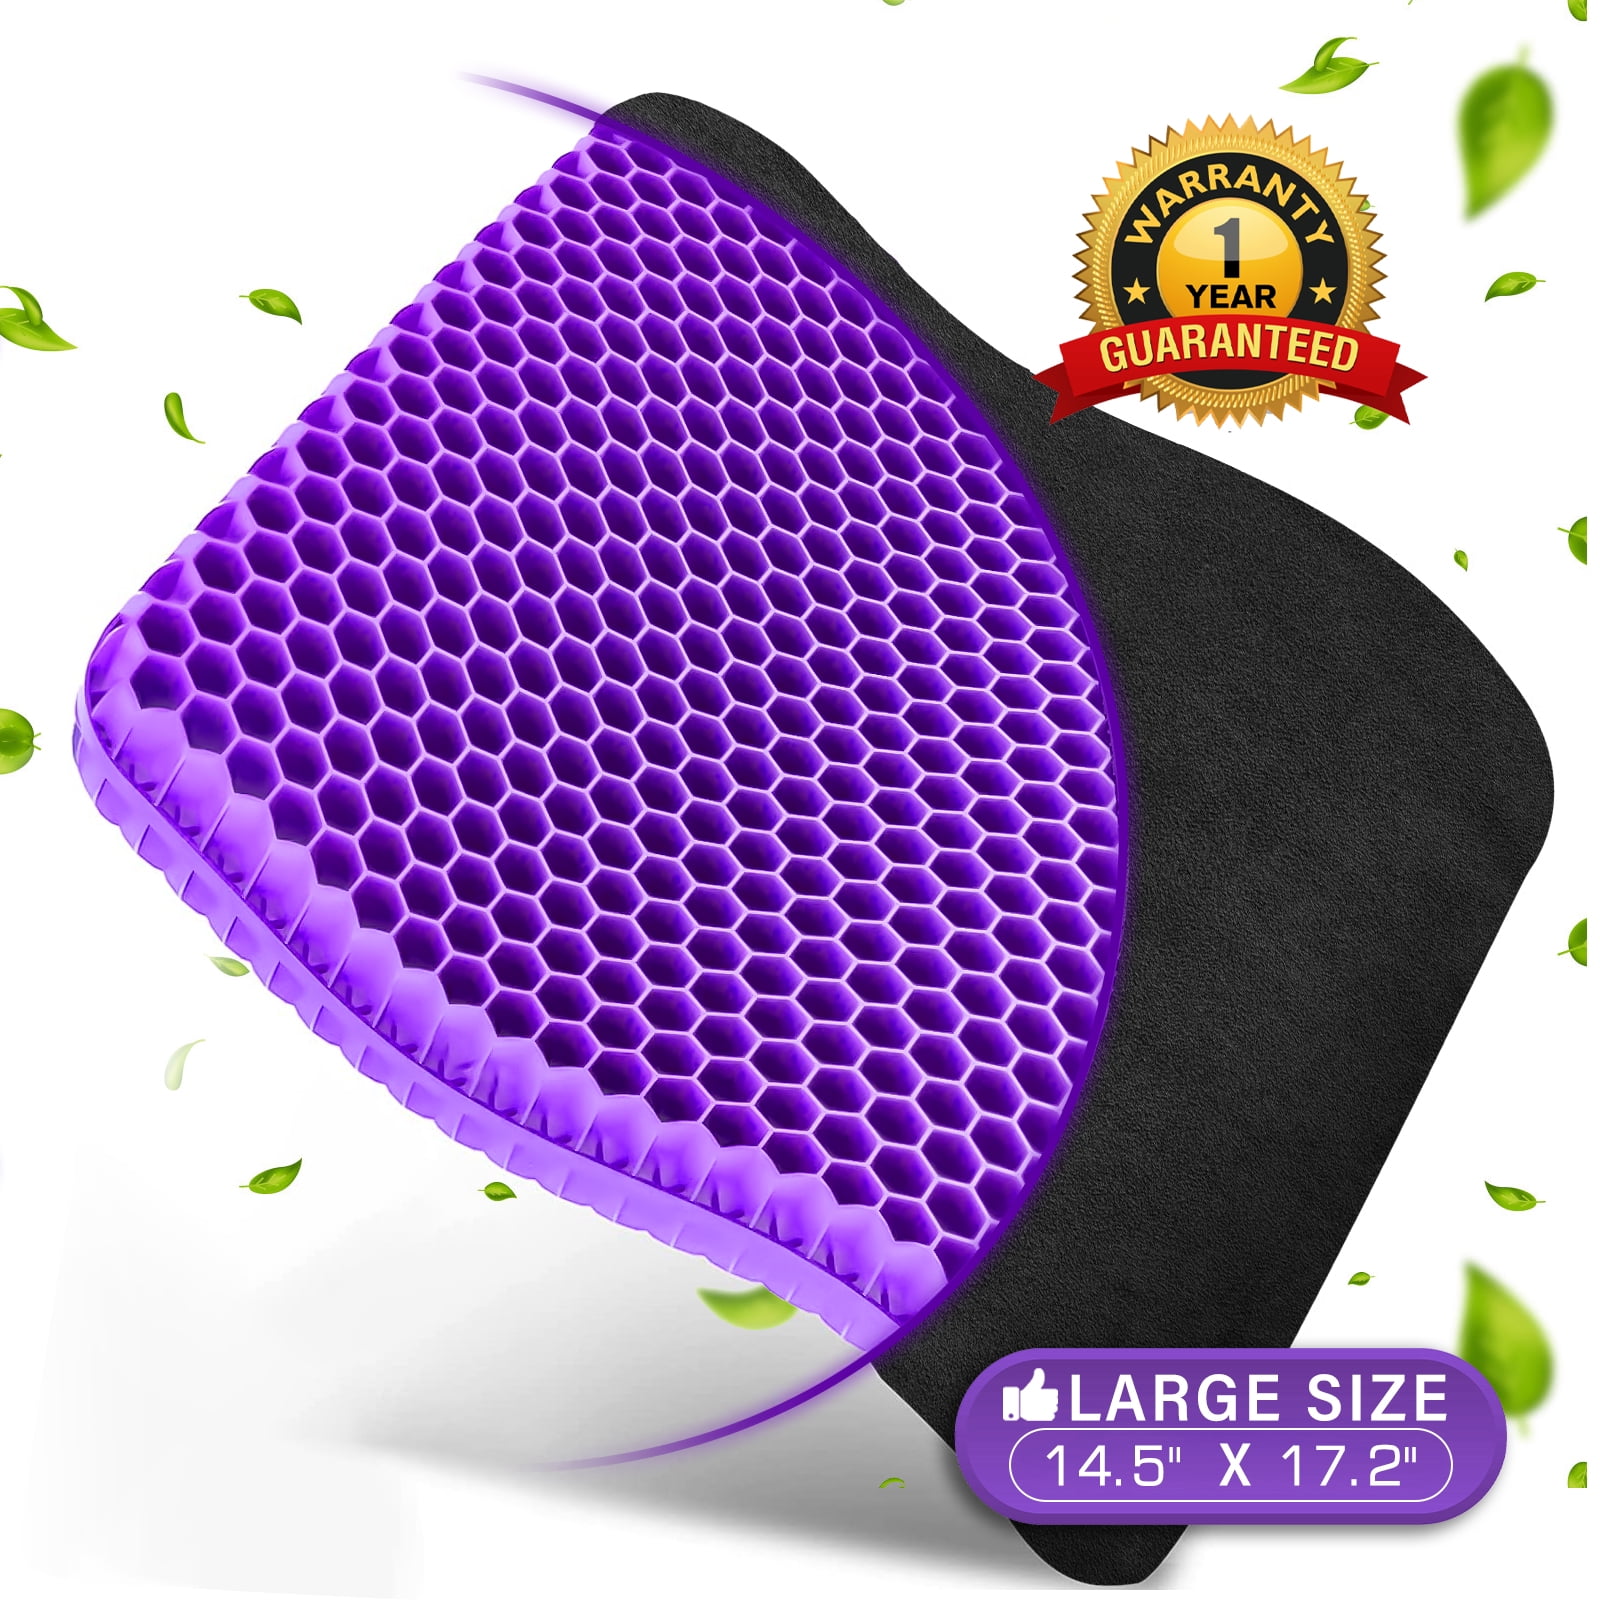 Super Large & Thick Gel Seat Cushion Up to 330lbs, Office Chair Cushion for Long Sitting, Breathable Egg Chair Pads Butt Pillow, Pain Relief Car Seat